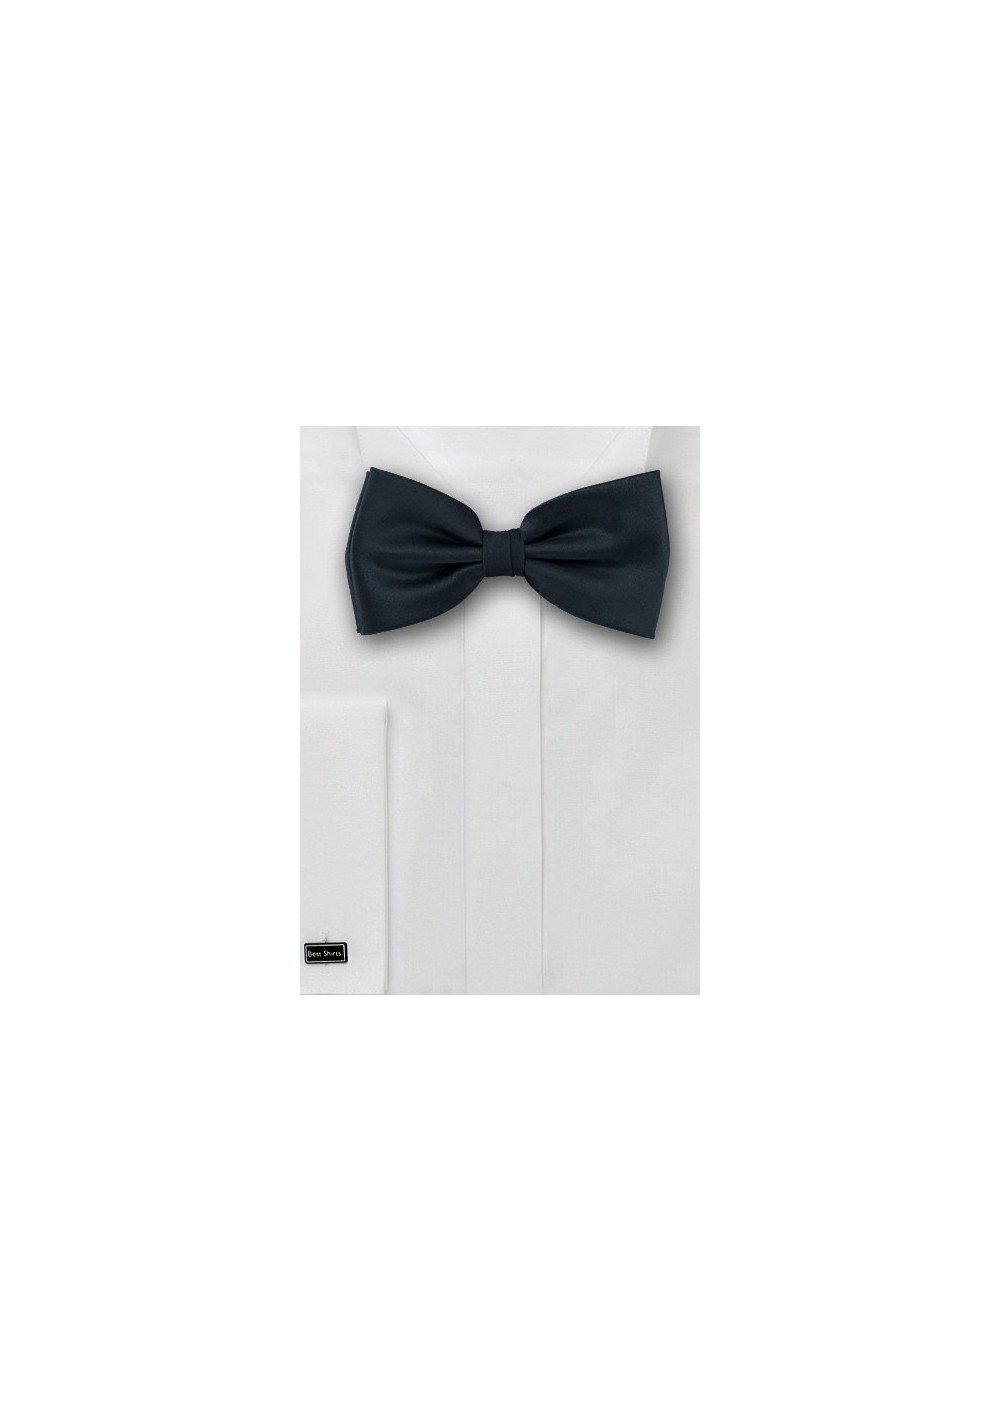 Bow ties -  Charcoal black bow tie